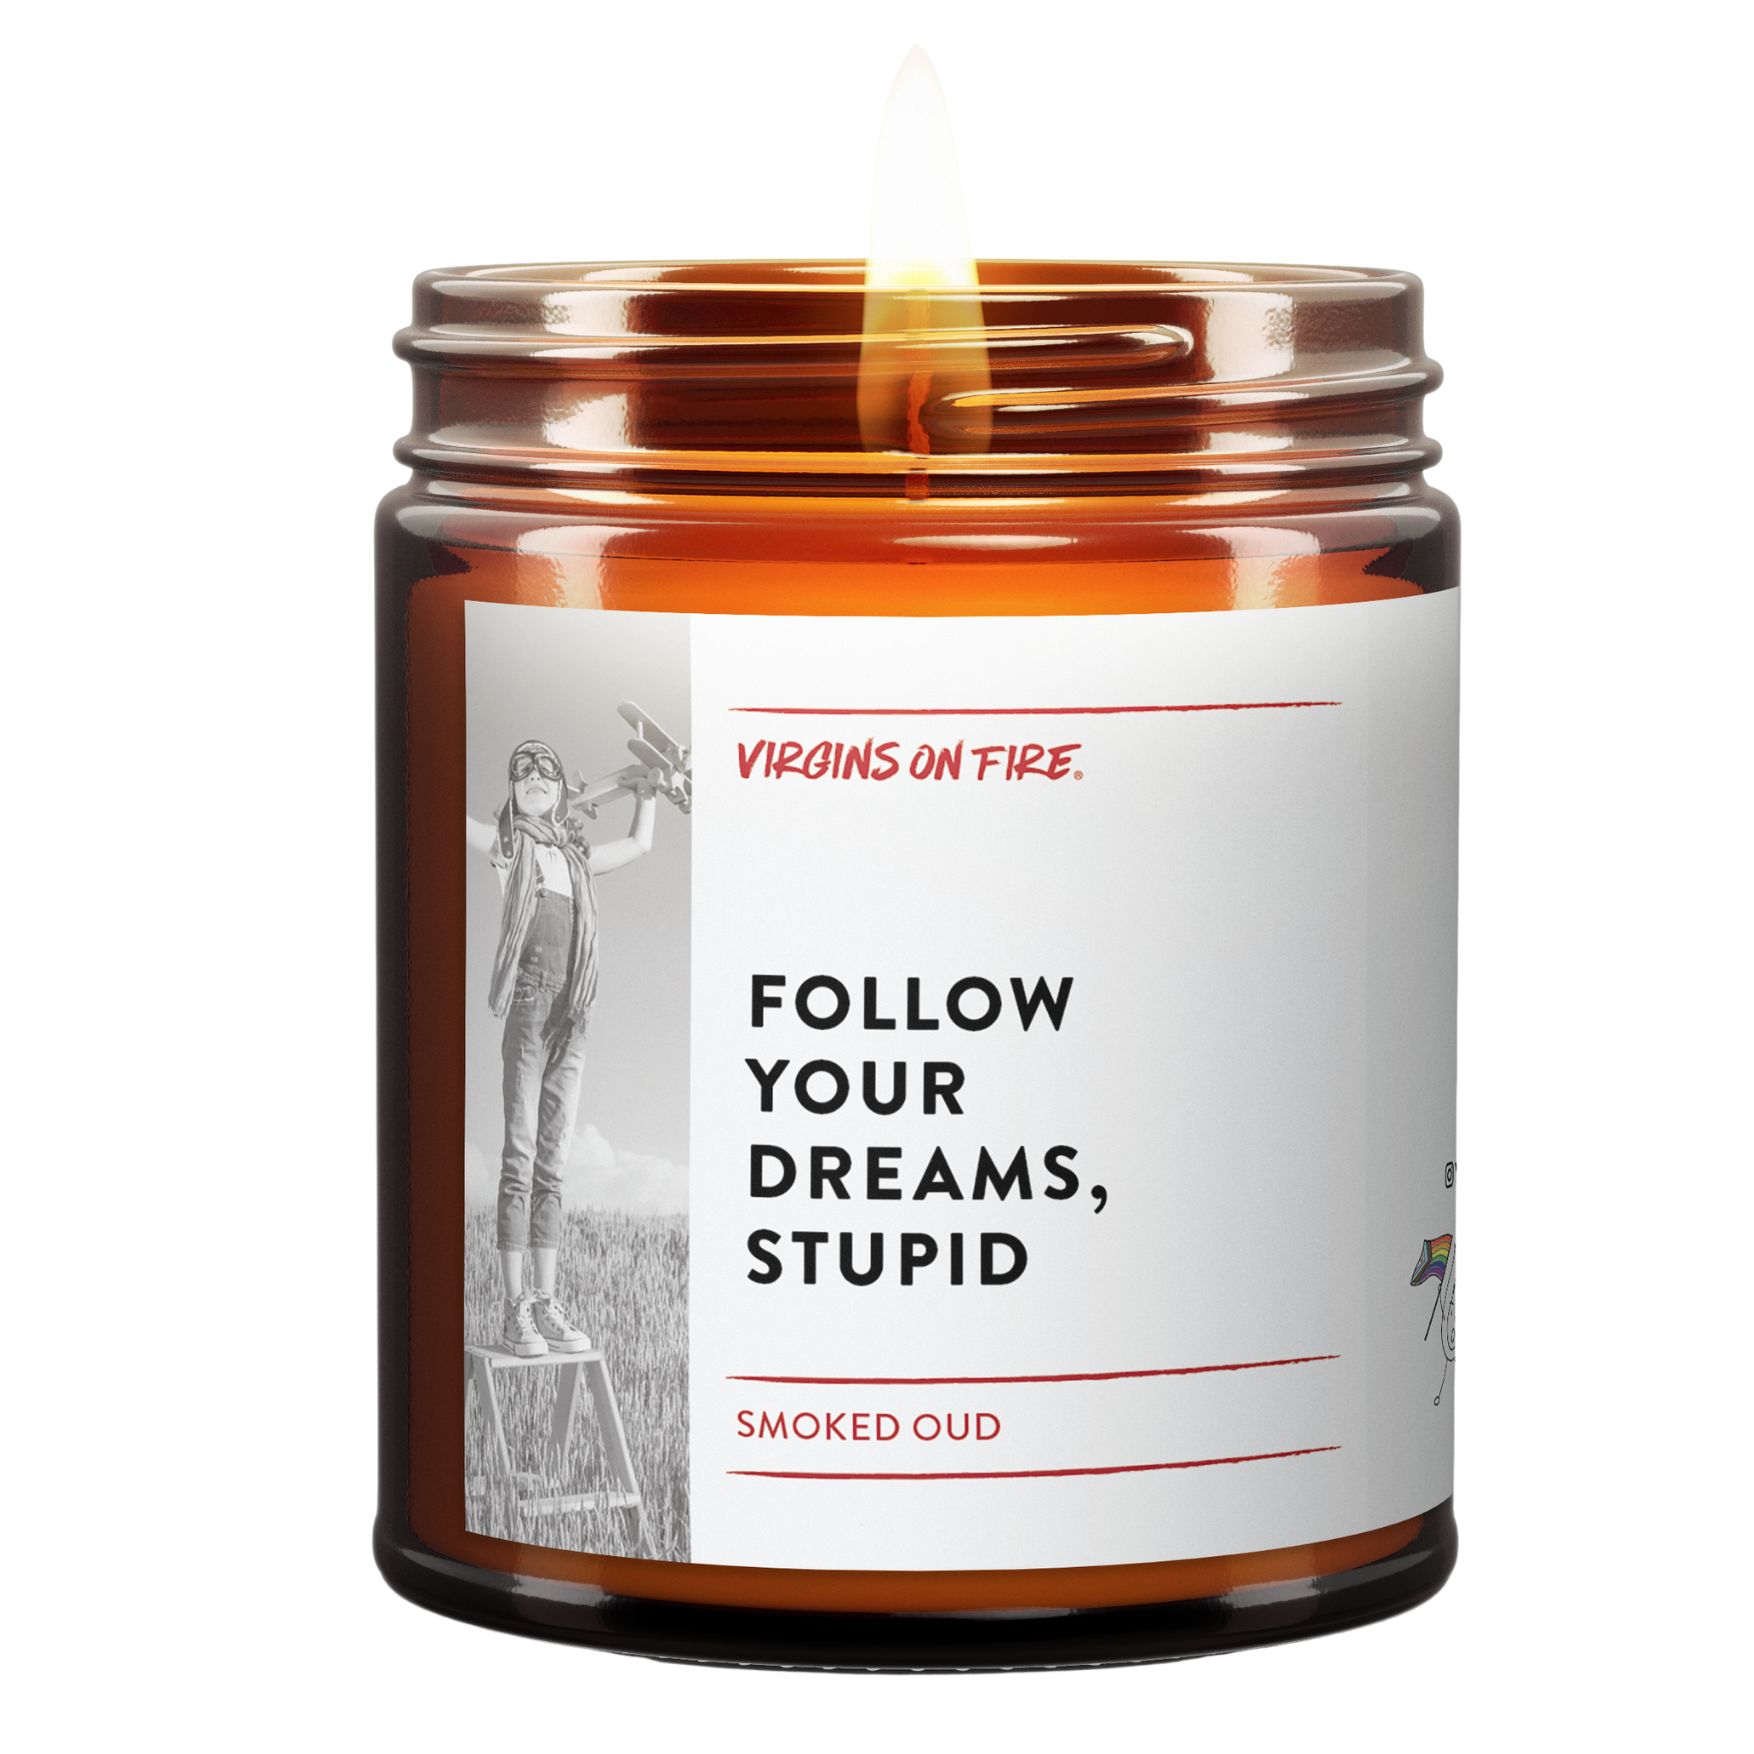 FOLLOW YOUR DREAMS, STUPID Scented Candle